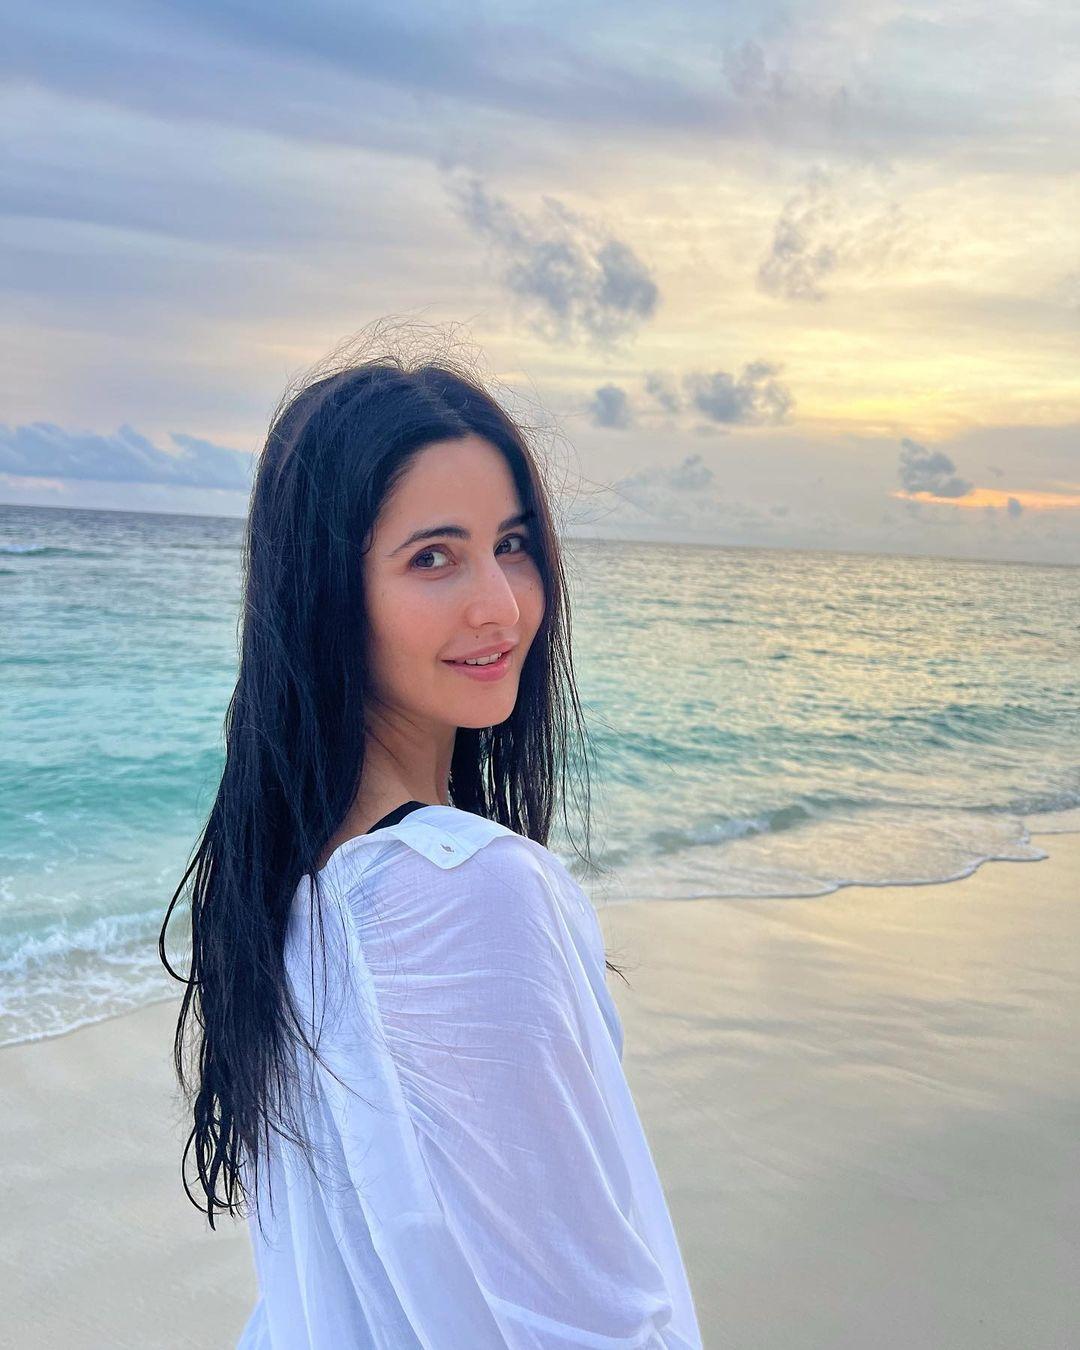 Katrina Kaif went to the Maldives with her husband and close friends to celebrate her birthday, and the actress' picture from the vacation is adorable